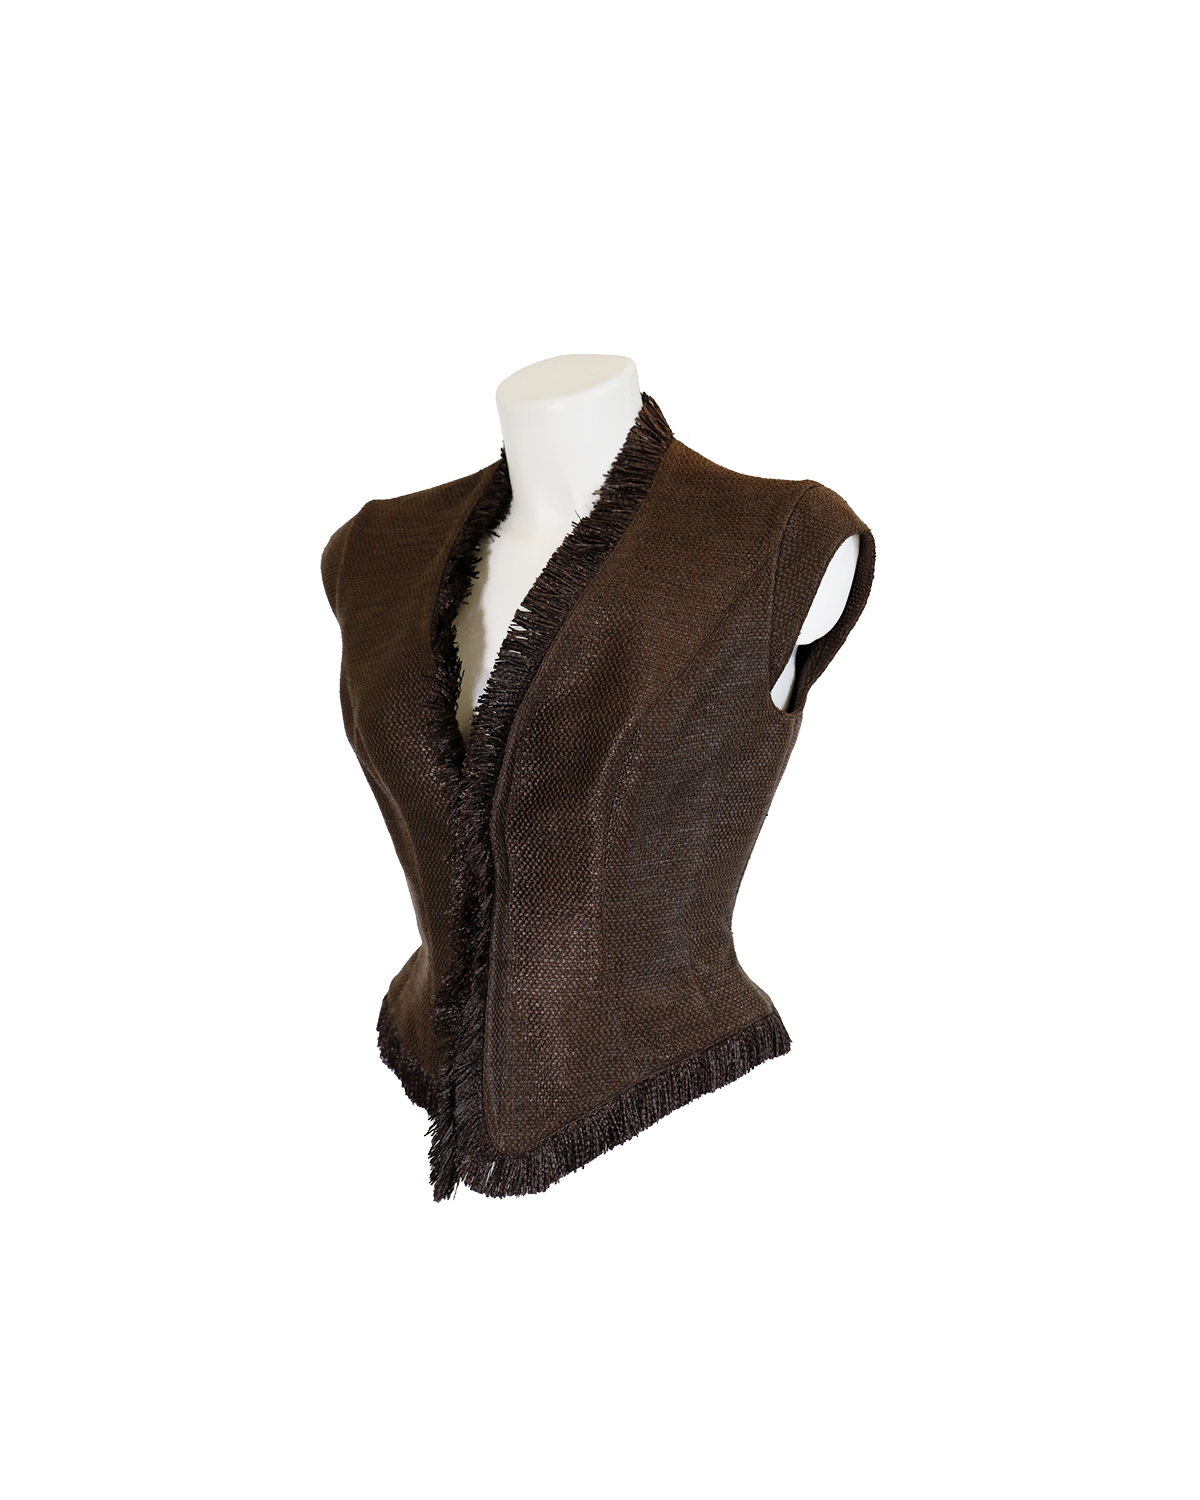 Thierry Mugler Brown Vest from 1980s